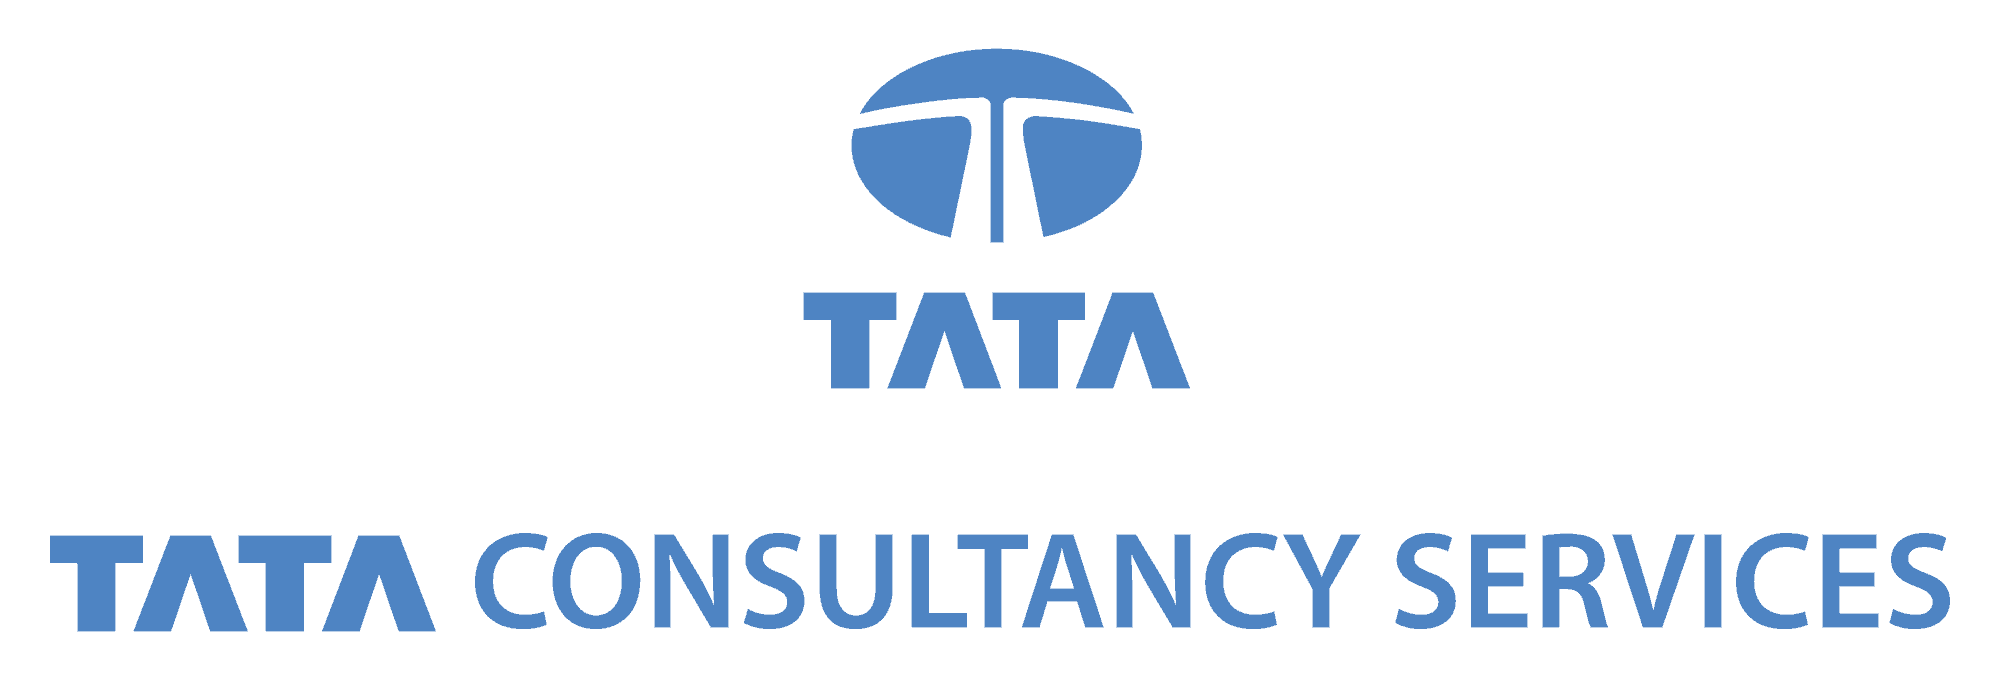 TCS is hiring Engineering graduates from 2019 batch across india